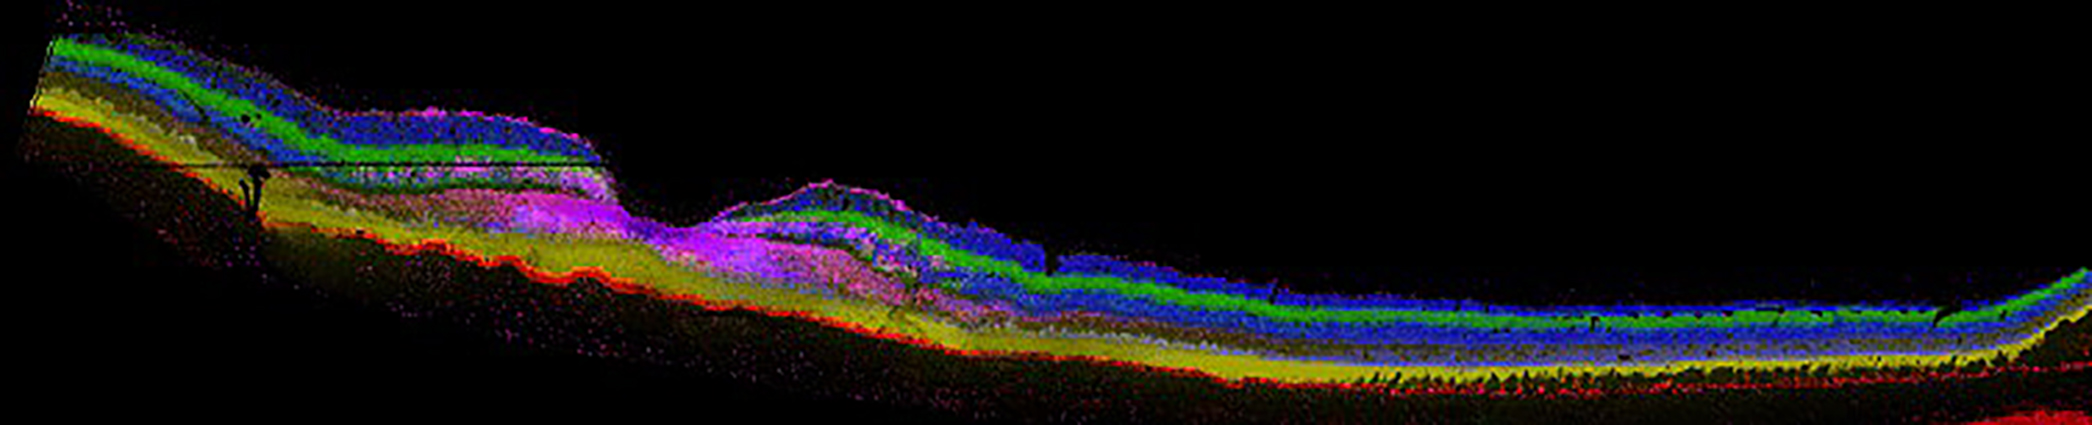 IMS image of human retina with each color representing a layer-specific lipid.